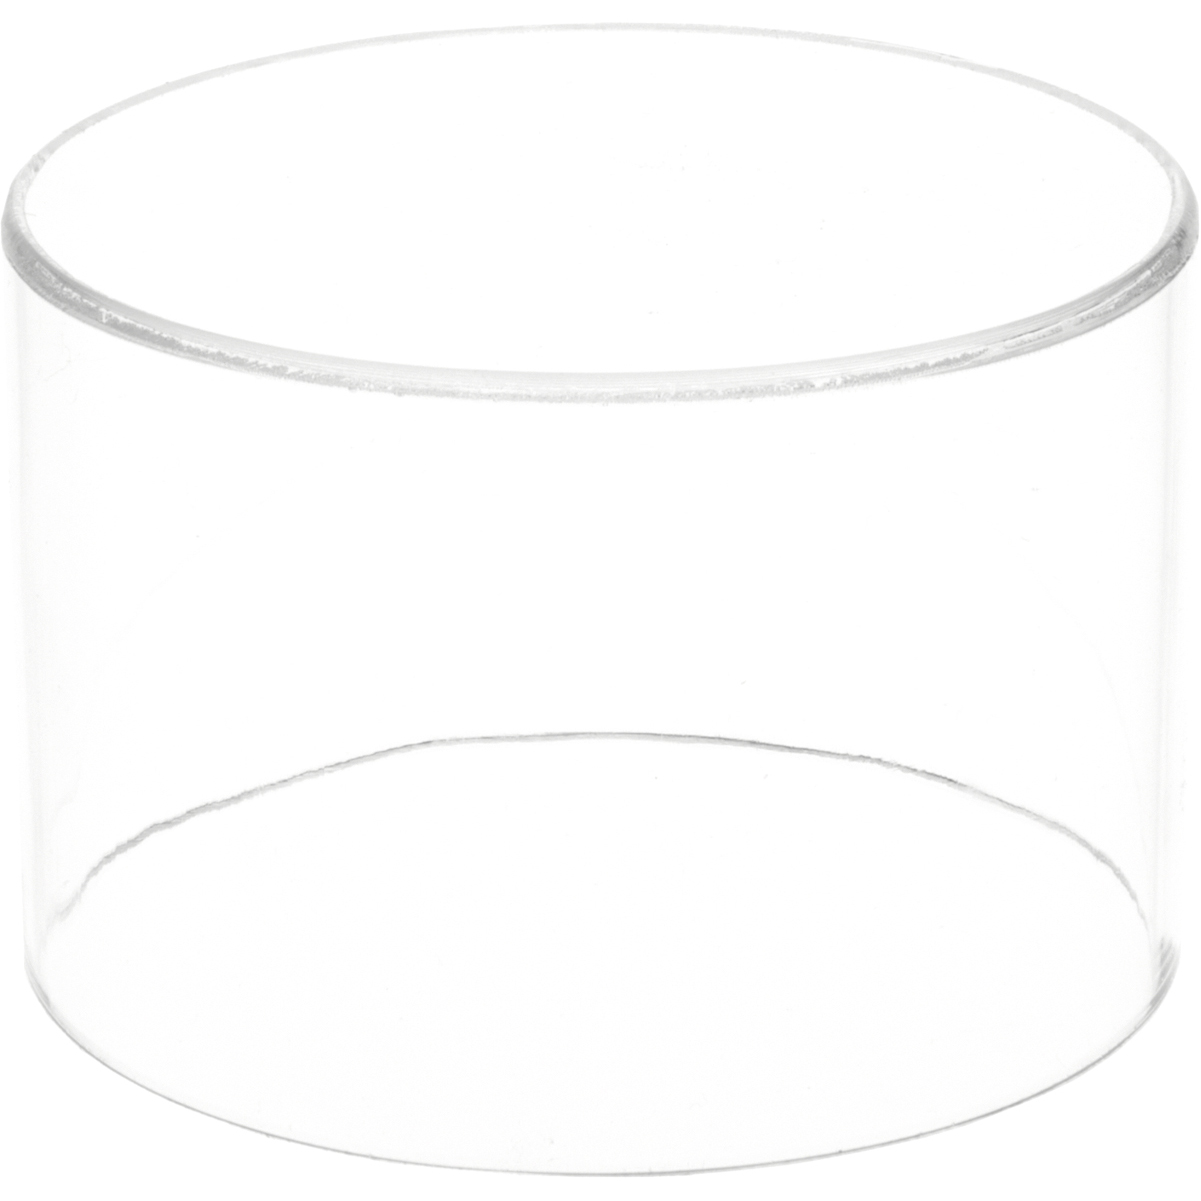 Width Height x 1.5 inches 1.5 inches Plymor Clear Acrylic Solid Cylinder Round Display Riser 